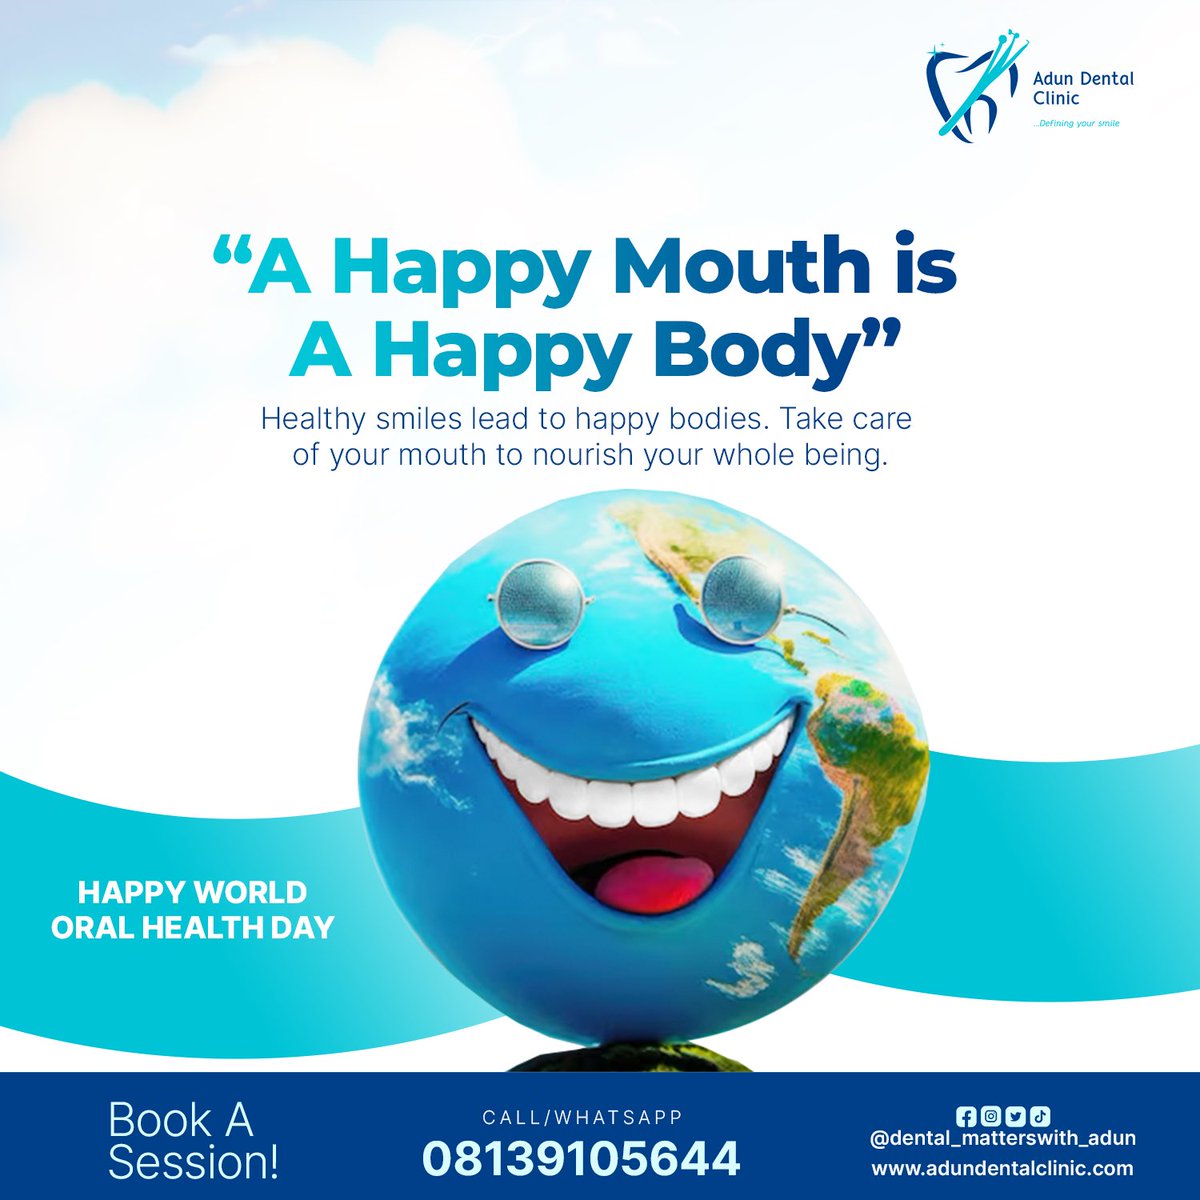 “A Happy Mouth is a Happy Body” 

Healthy smiles lead to Happy bodies. Take care of your mouth to nourish your whole being. 

Happy World Oral Health Day 😁 to you from all of us at Adun Dental Clinic

Don’t forget to book a session with us adundentalclinic.com/book-your-appo…

#ColgateWOHD24